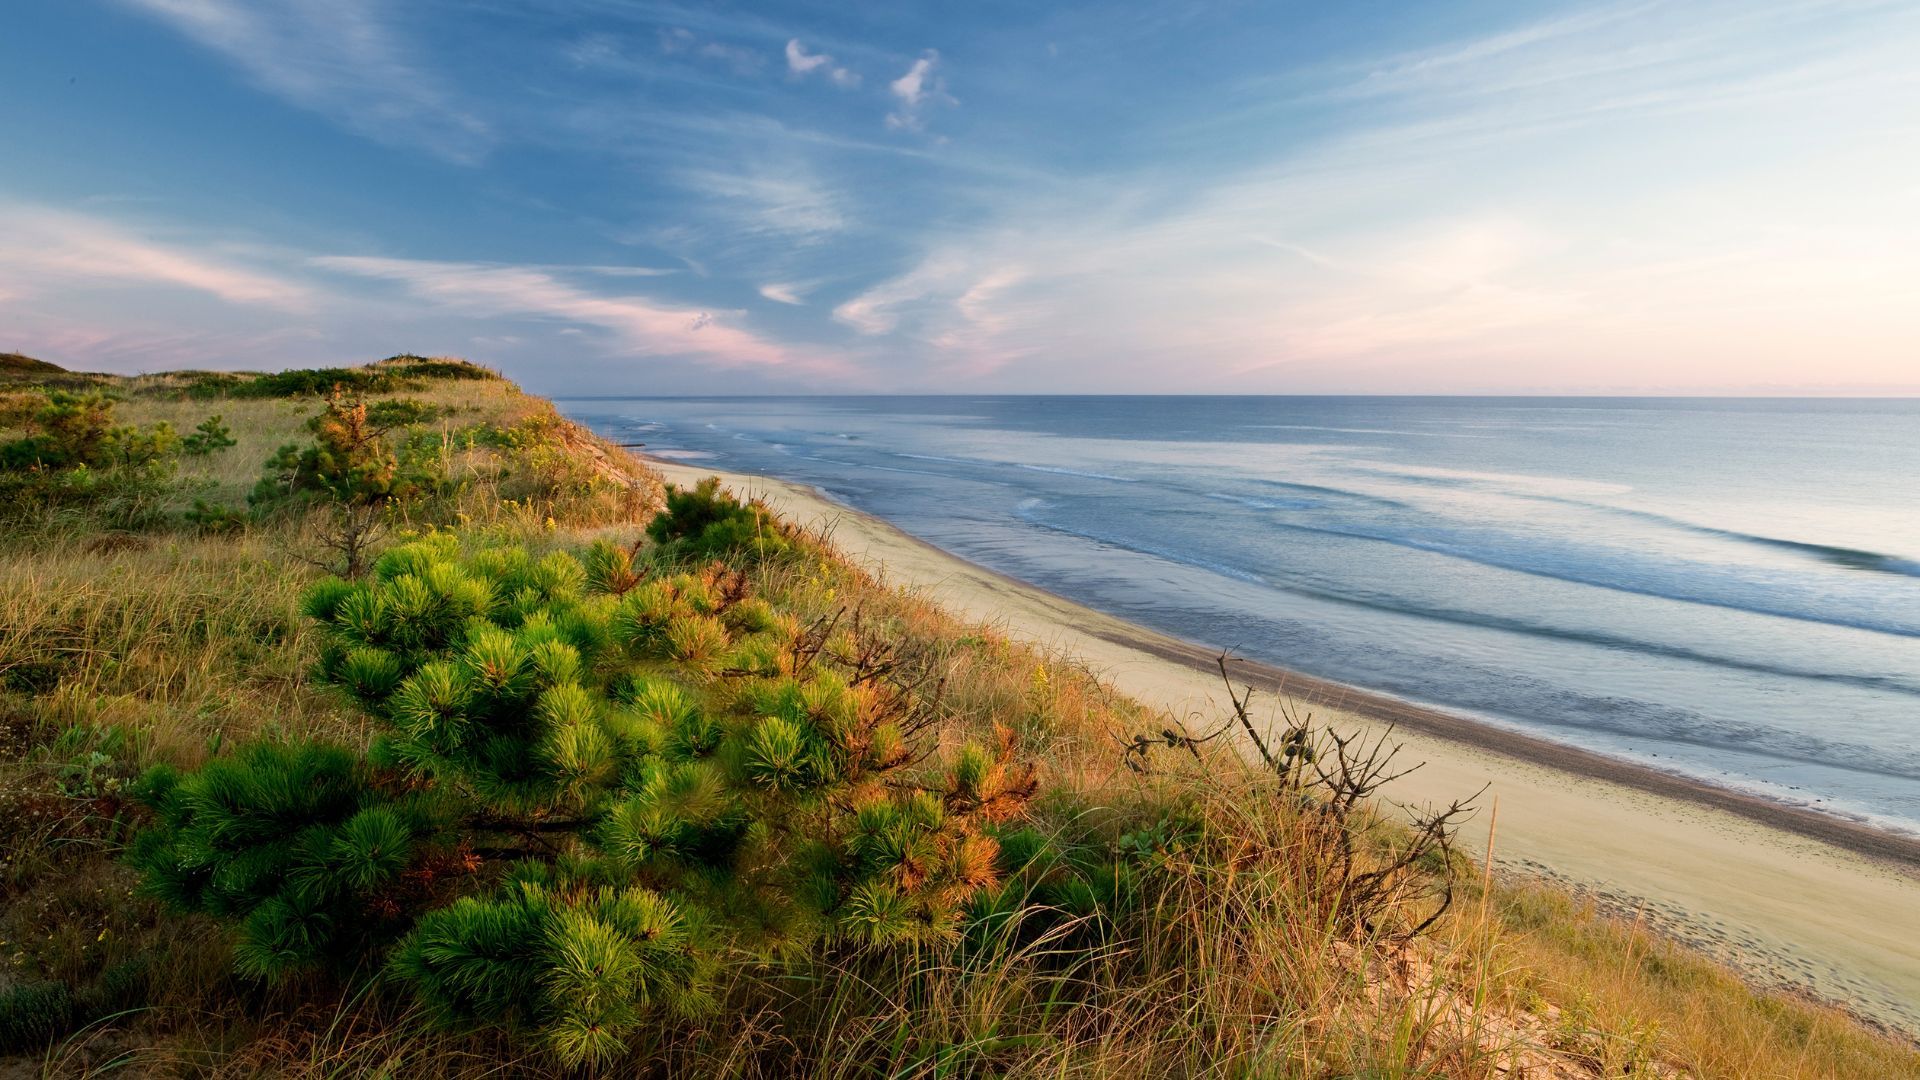 <p>                     Enjoy exploring the outdoors with your pooch in tow? Take a trip to Massachusetts and adventure the 40-mile stretch of sand Cape Cod National Seashore has to see. This spot welcomes leashed dogs all year long.                   </p>